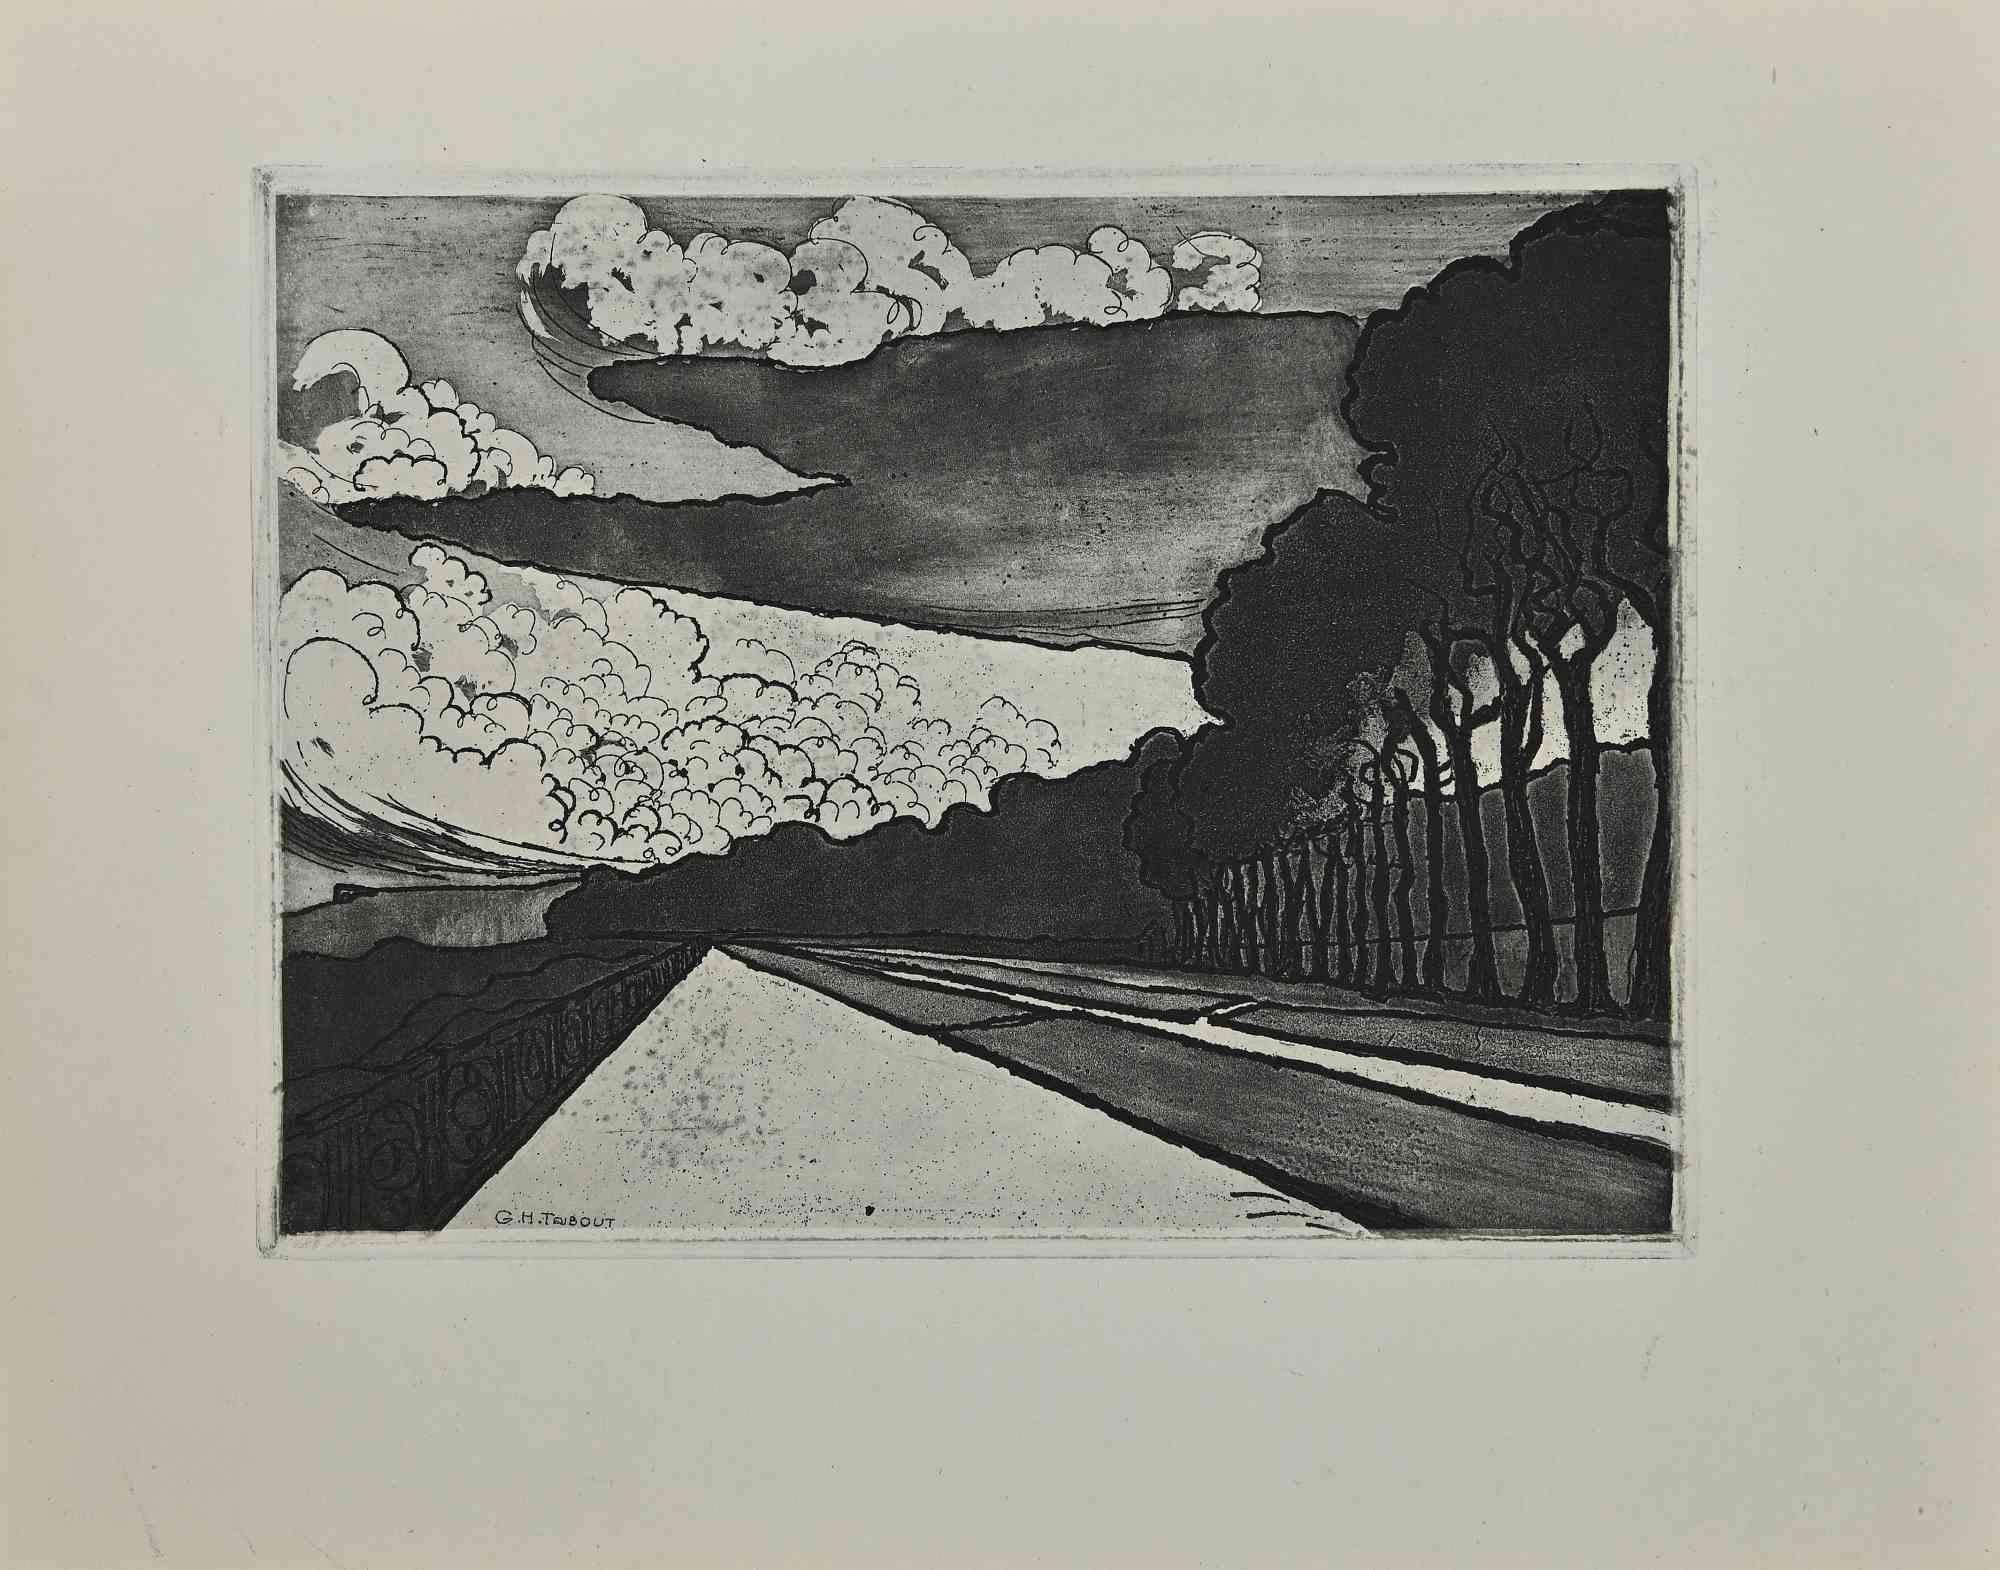 Landscape -Original Etching by George-Henri Tribout - Early 20th Century